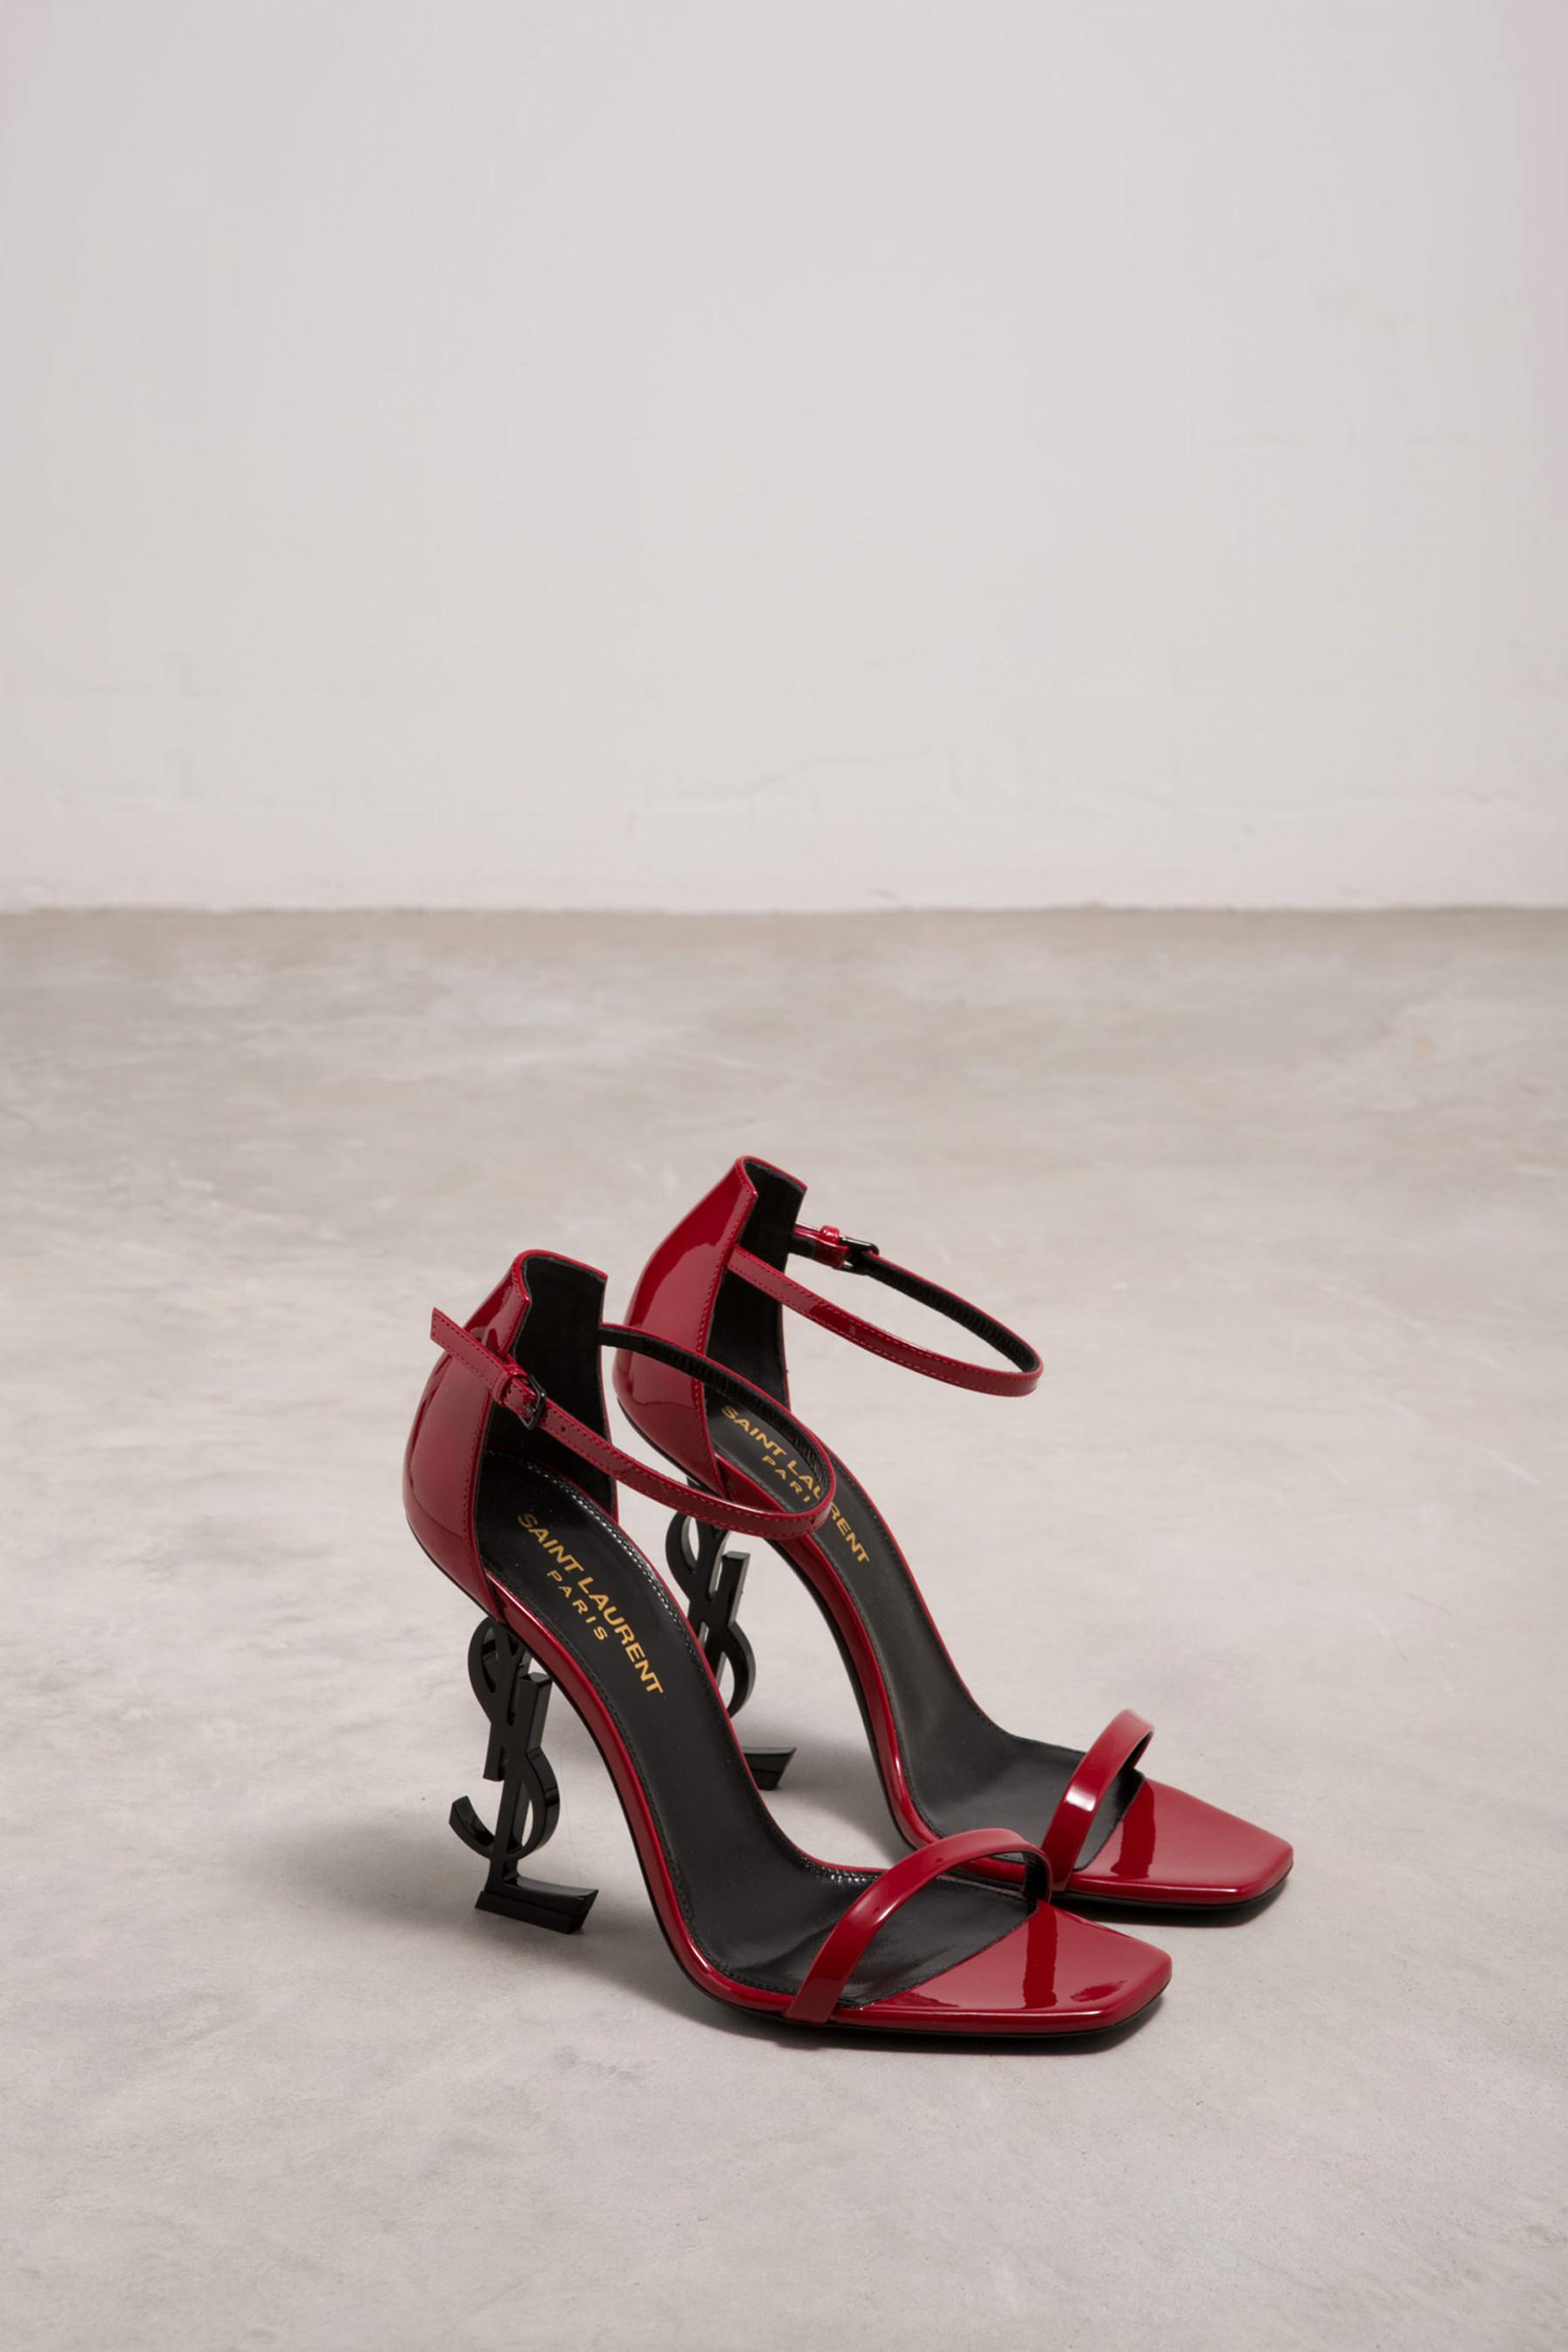 ysl sandals red